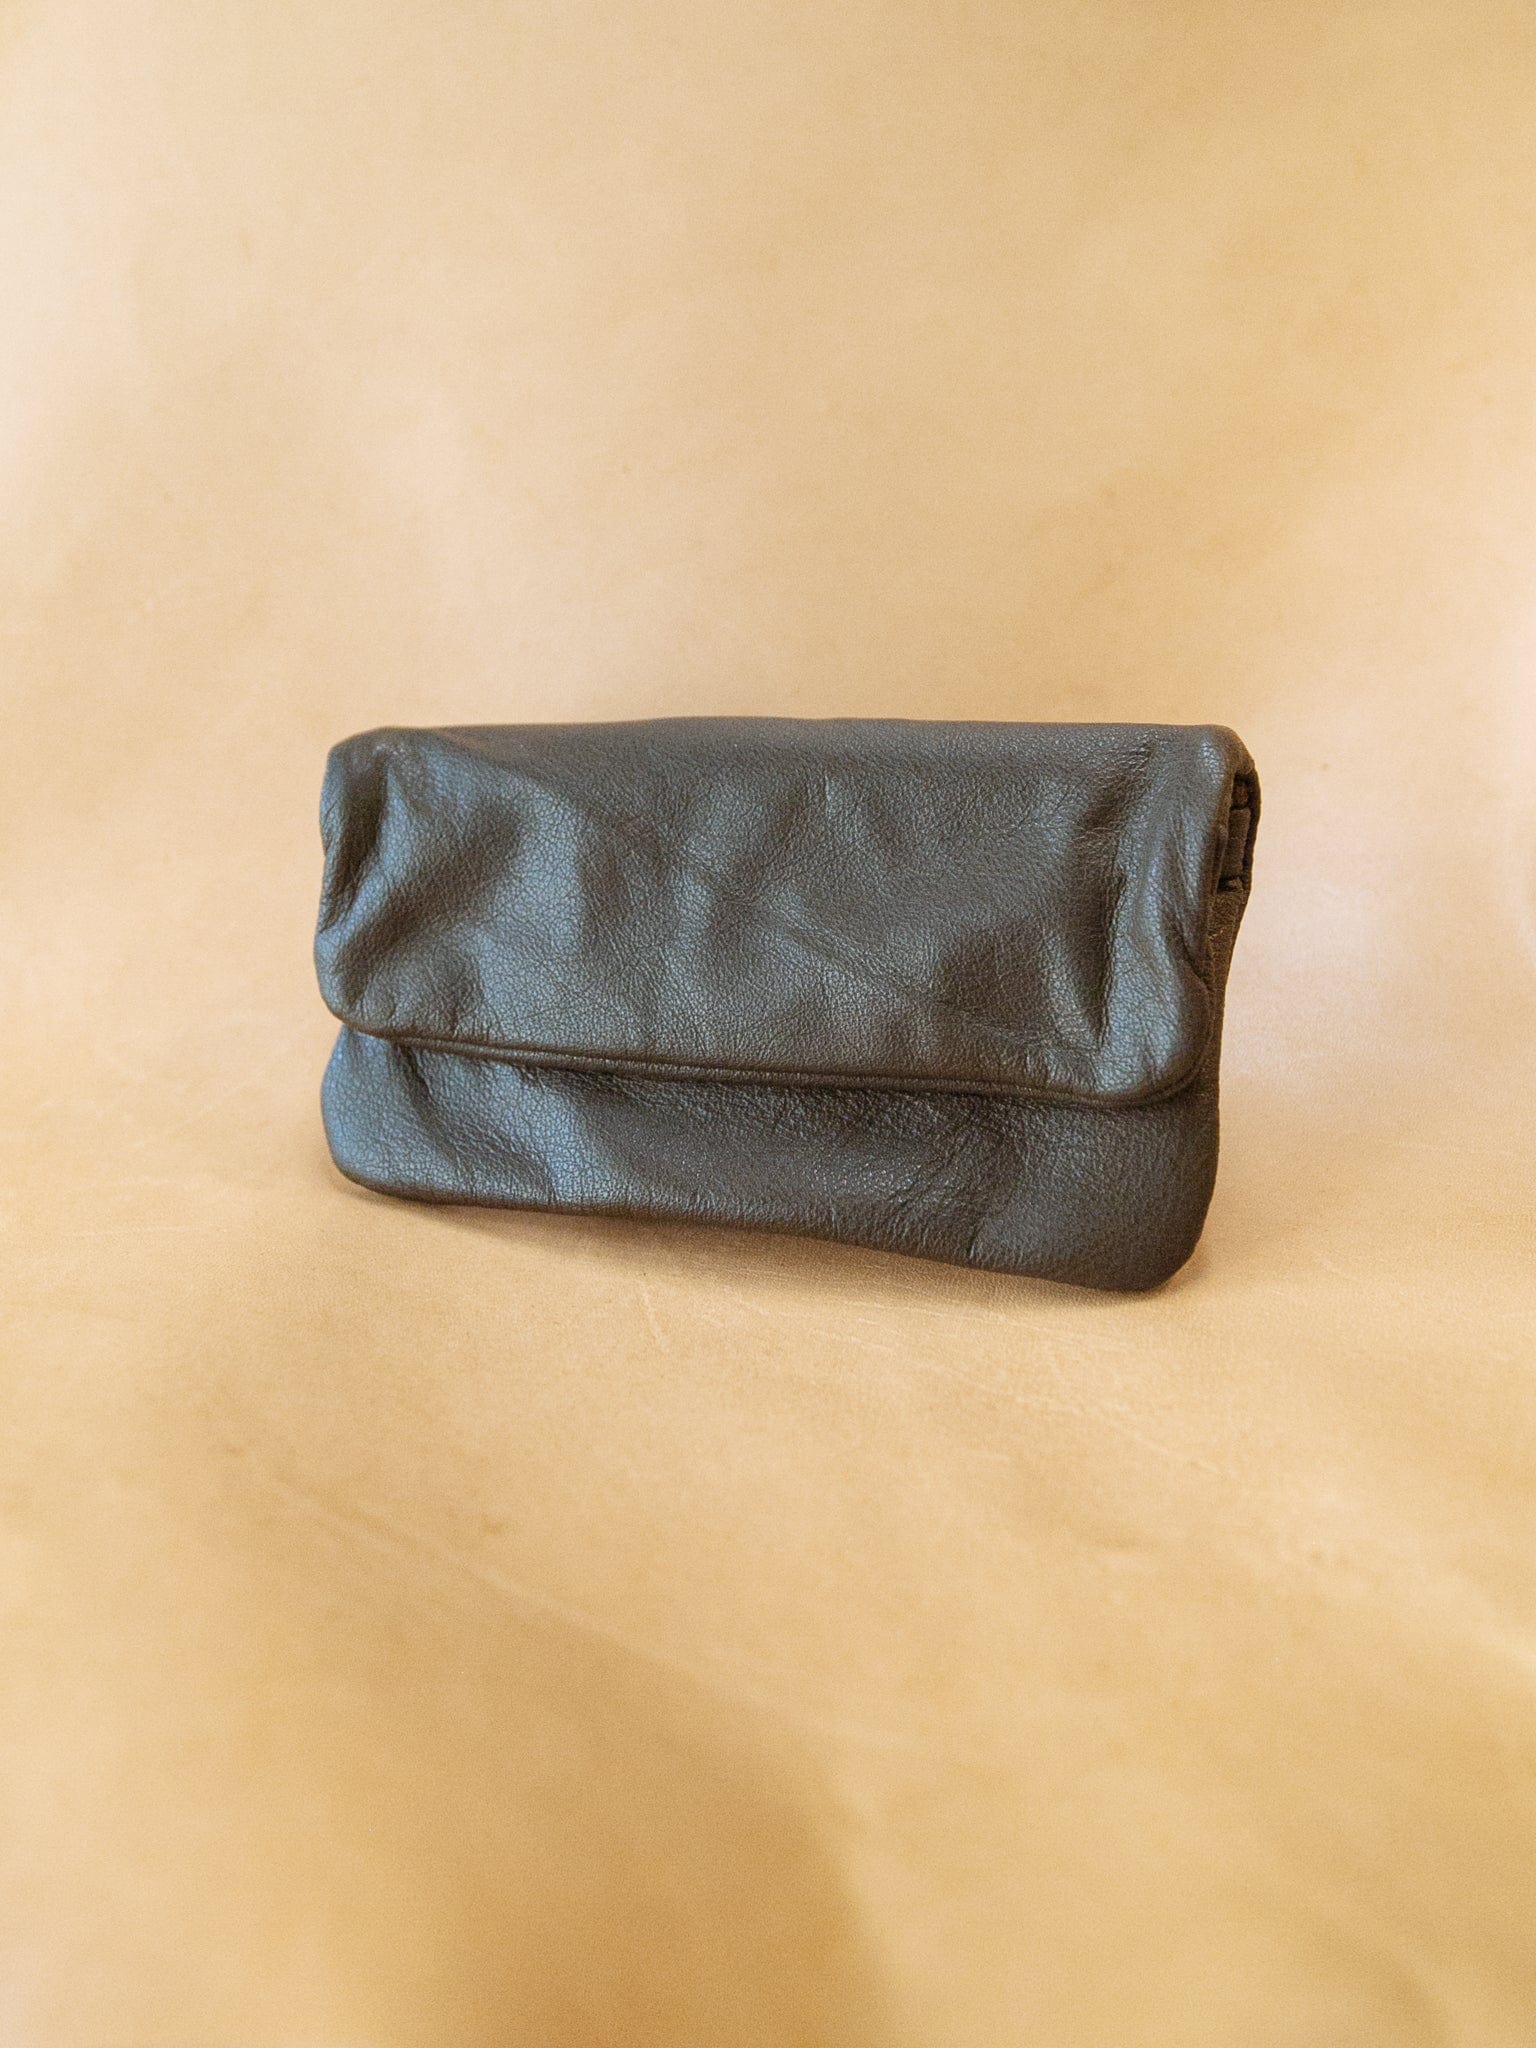 The Real McCaul Tobacco Pouches Tobacco Pouch - Cowhide Australian Made Australian Owned Leather Tobacco Pouch Australian Made Kangaroo & Cowhide Leather